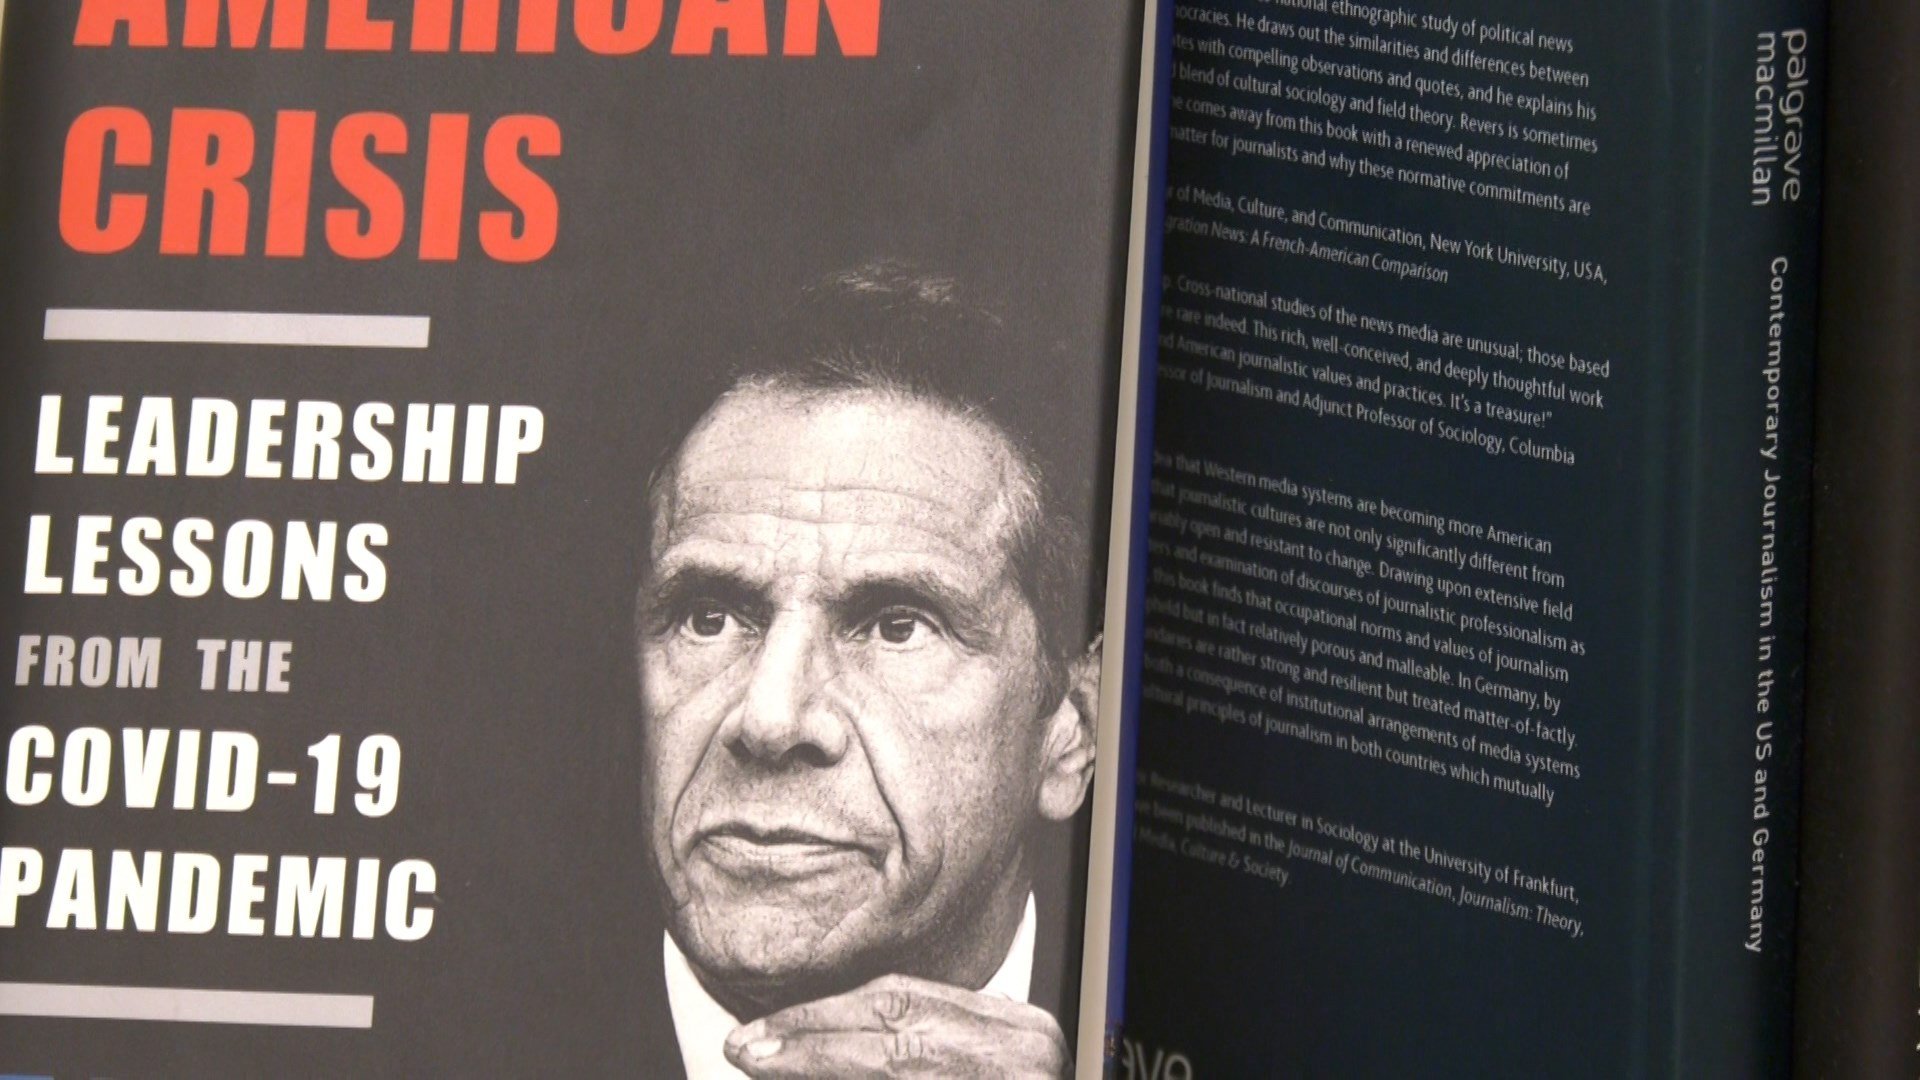 Cuomo's $5.1 million COVID book deal ethics dispute awaits Court of Appeals review